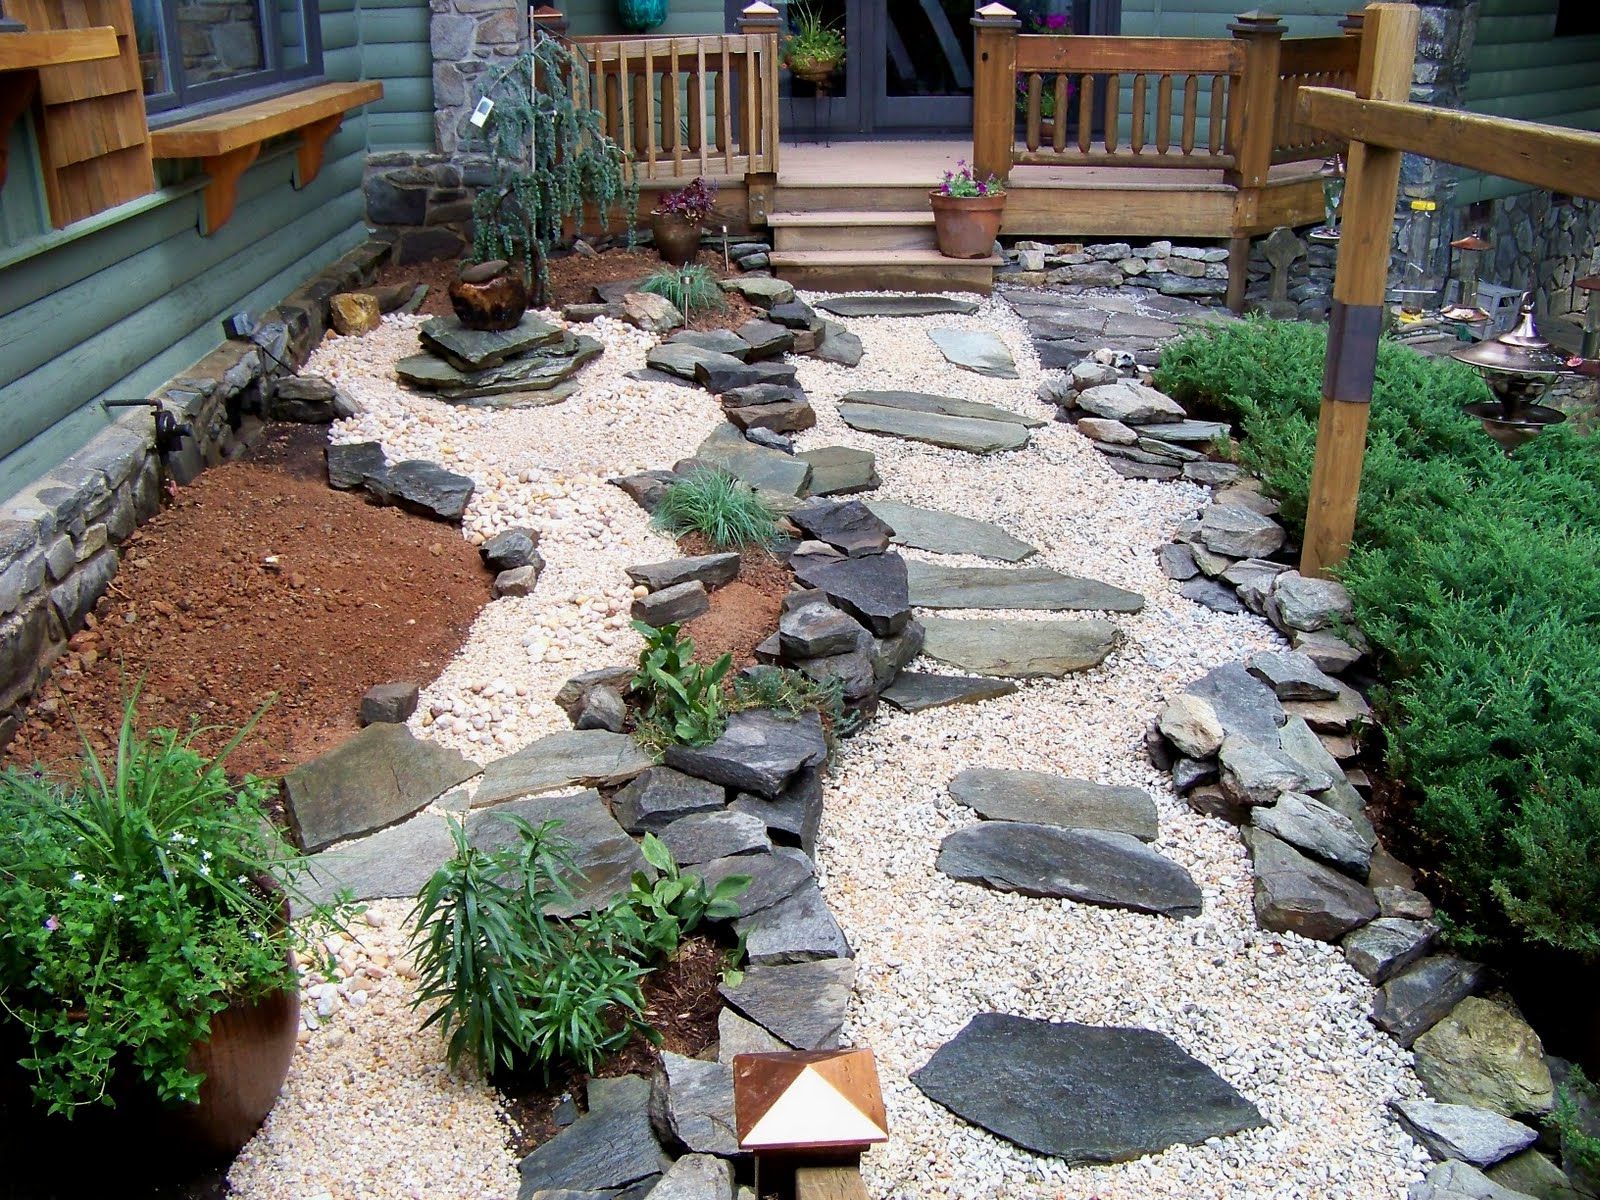 Concept In Ideas Attractive Concept In Rock Garden Ideas With Stones As Tiles At Rustic Front Yard Image Decoration Rock Garden Ideas Using Nature Exterior Accent